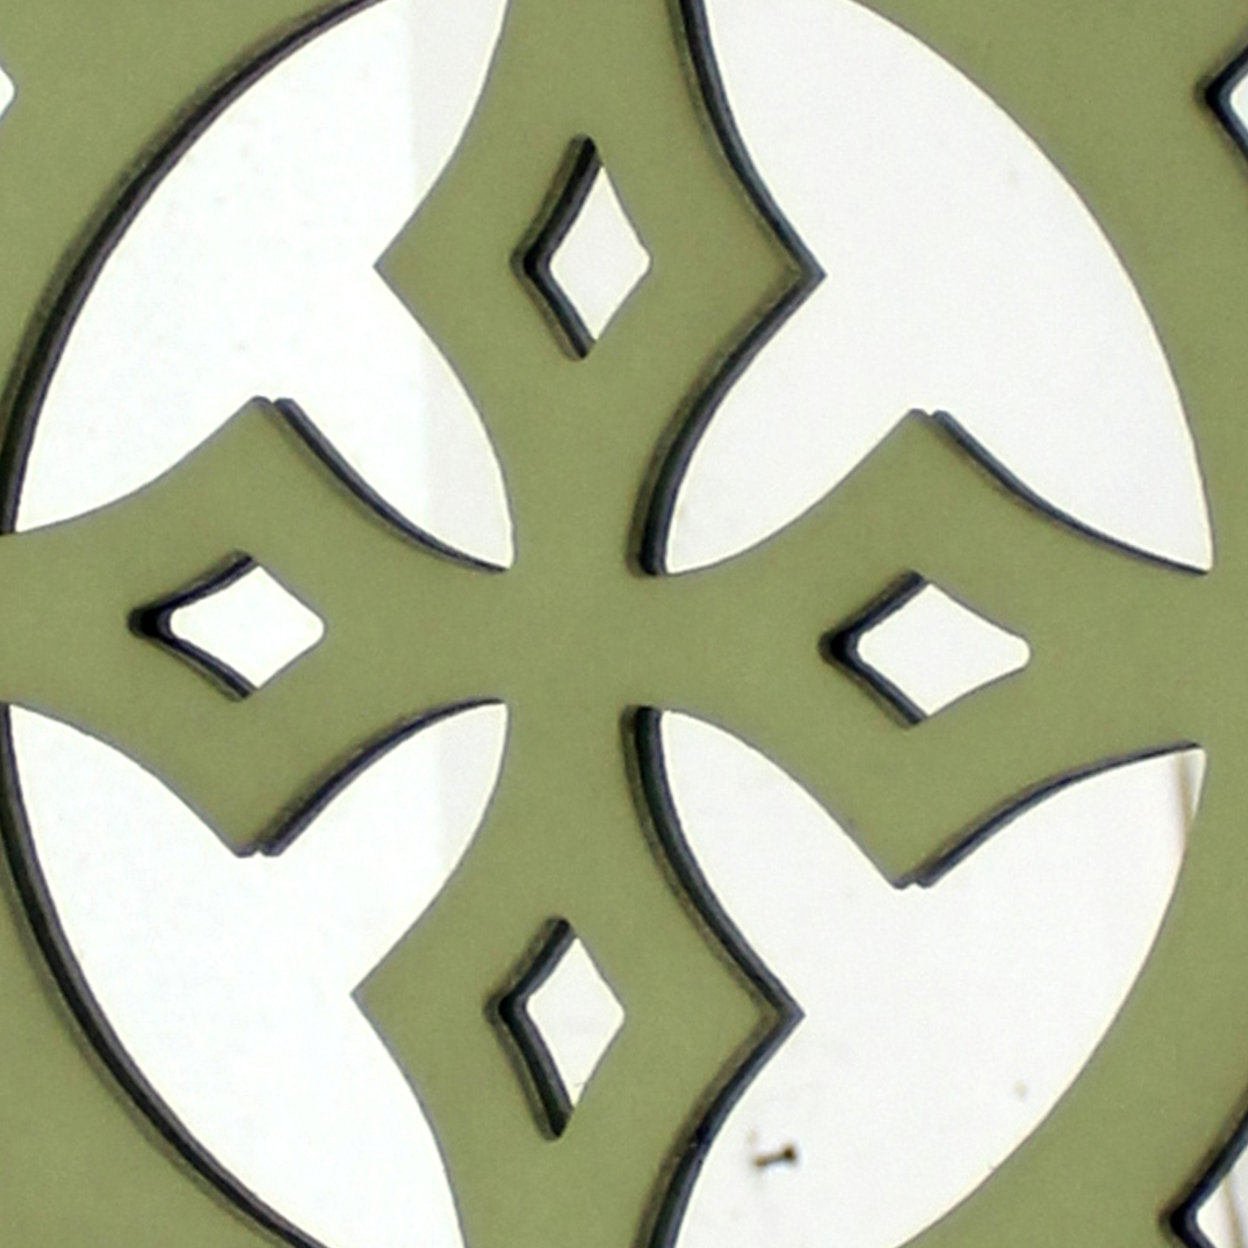 Round Wooden Wall Decor With Minimalist Pattern On Top, Green And Silver- Saltoro Sherpi